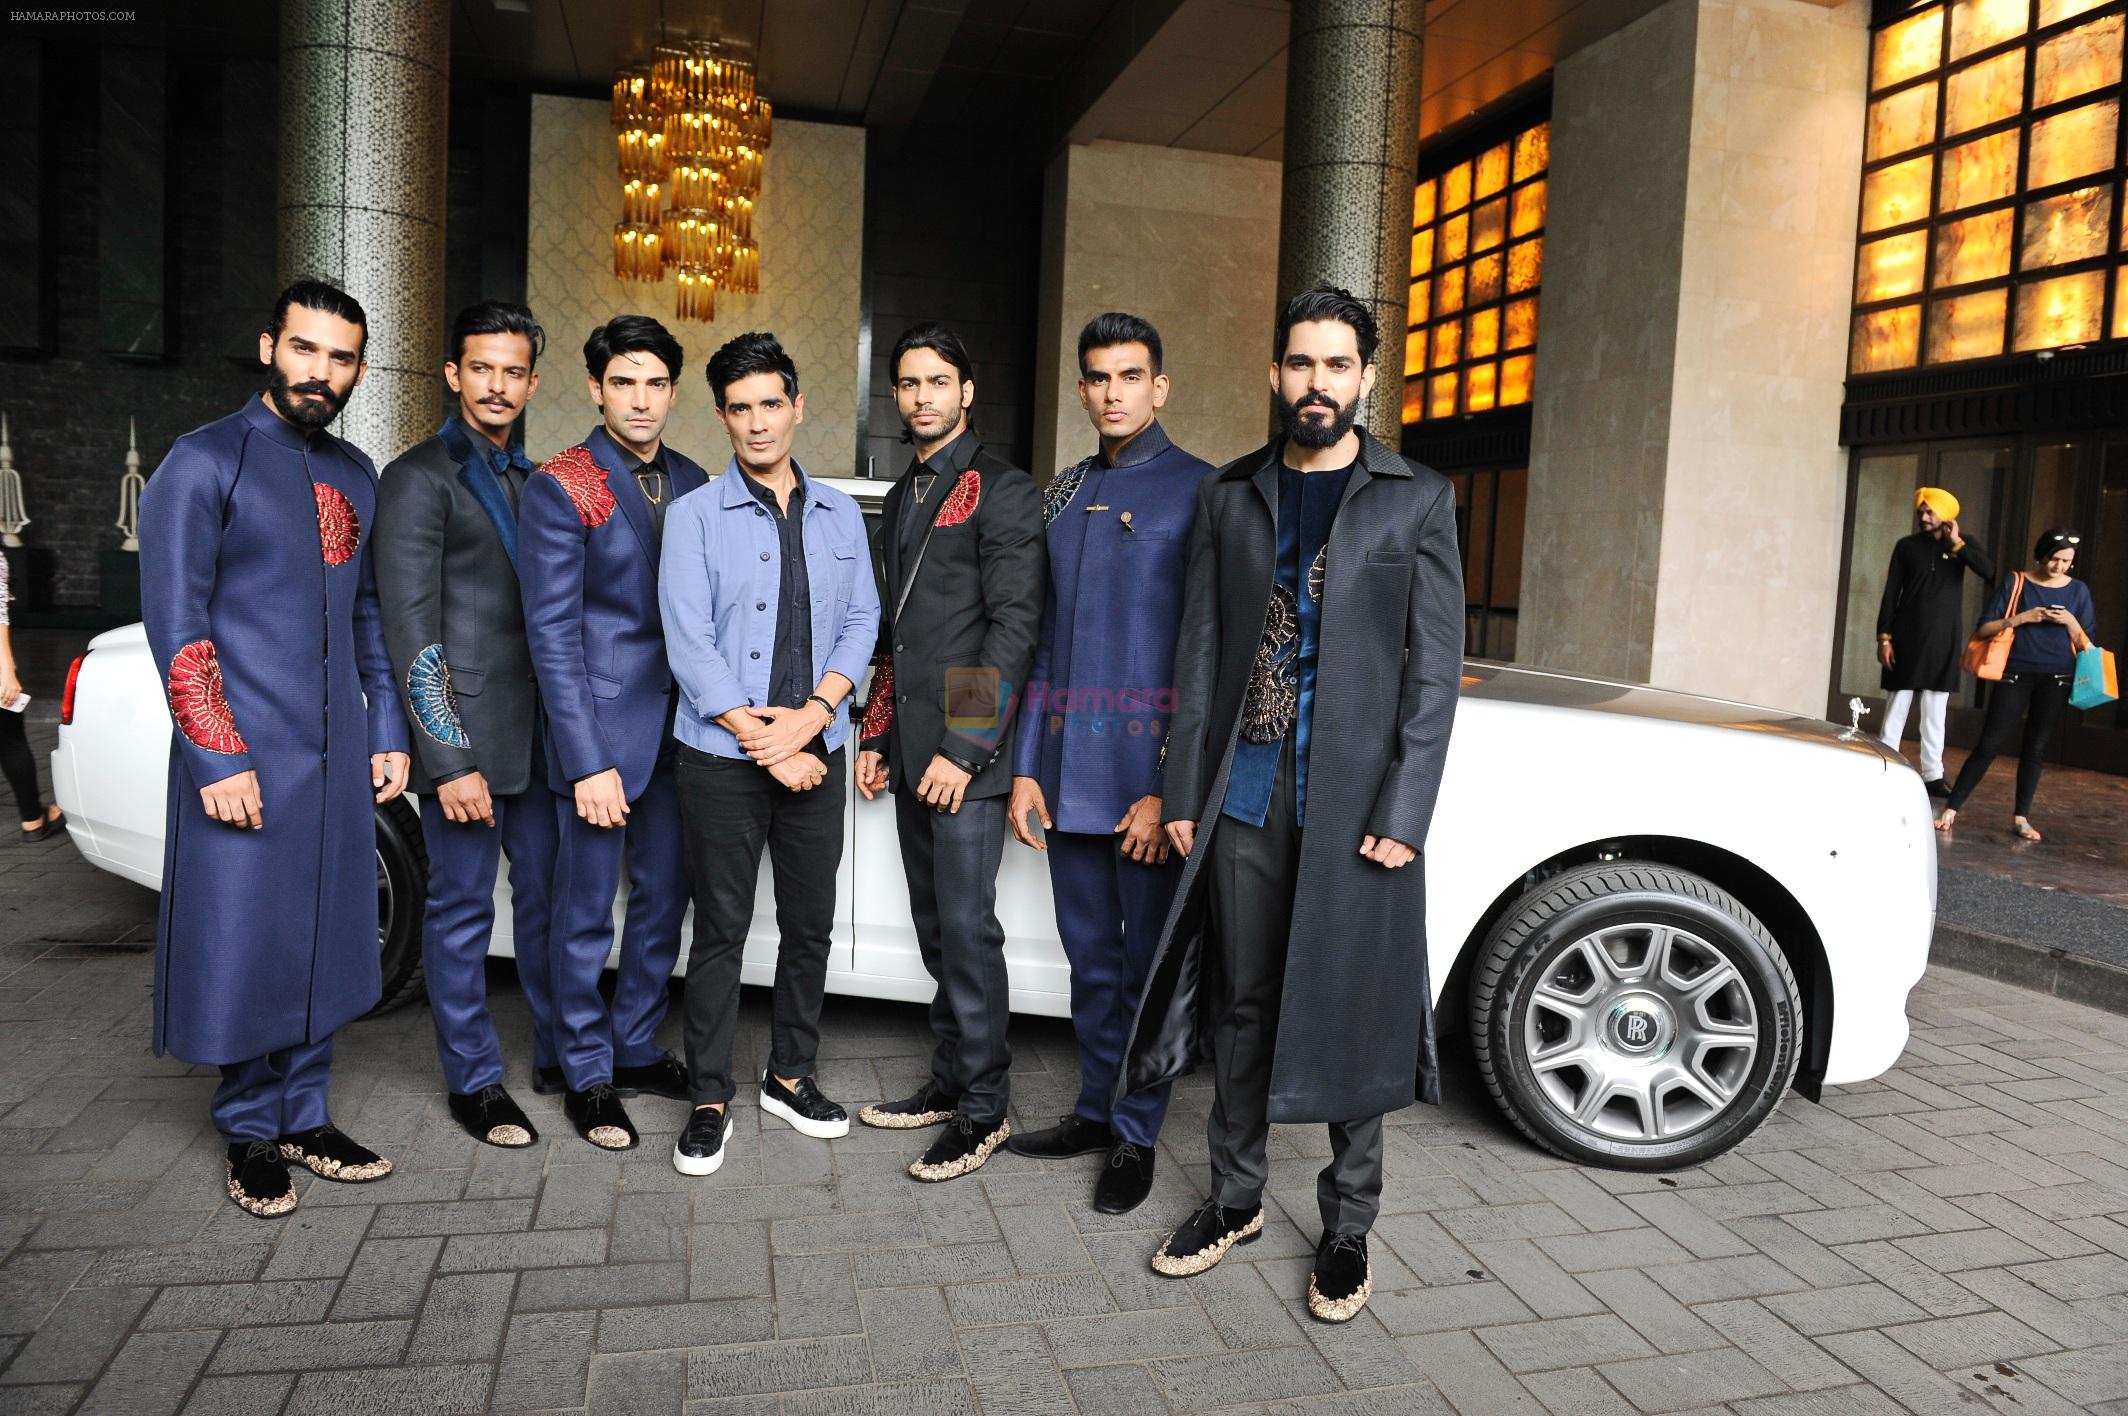 Designer Manish Malhotra with models at the preview of his collection _The Gentlemen's Club_ at Lakme Fashion Week Winter Festive 2015_2